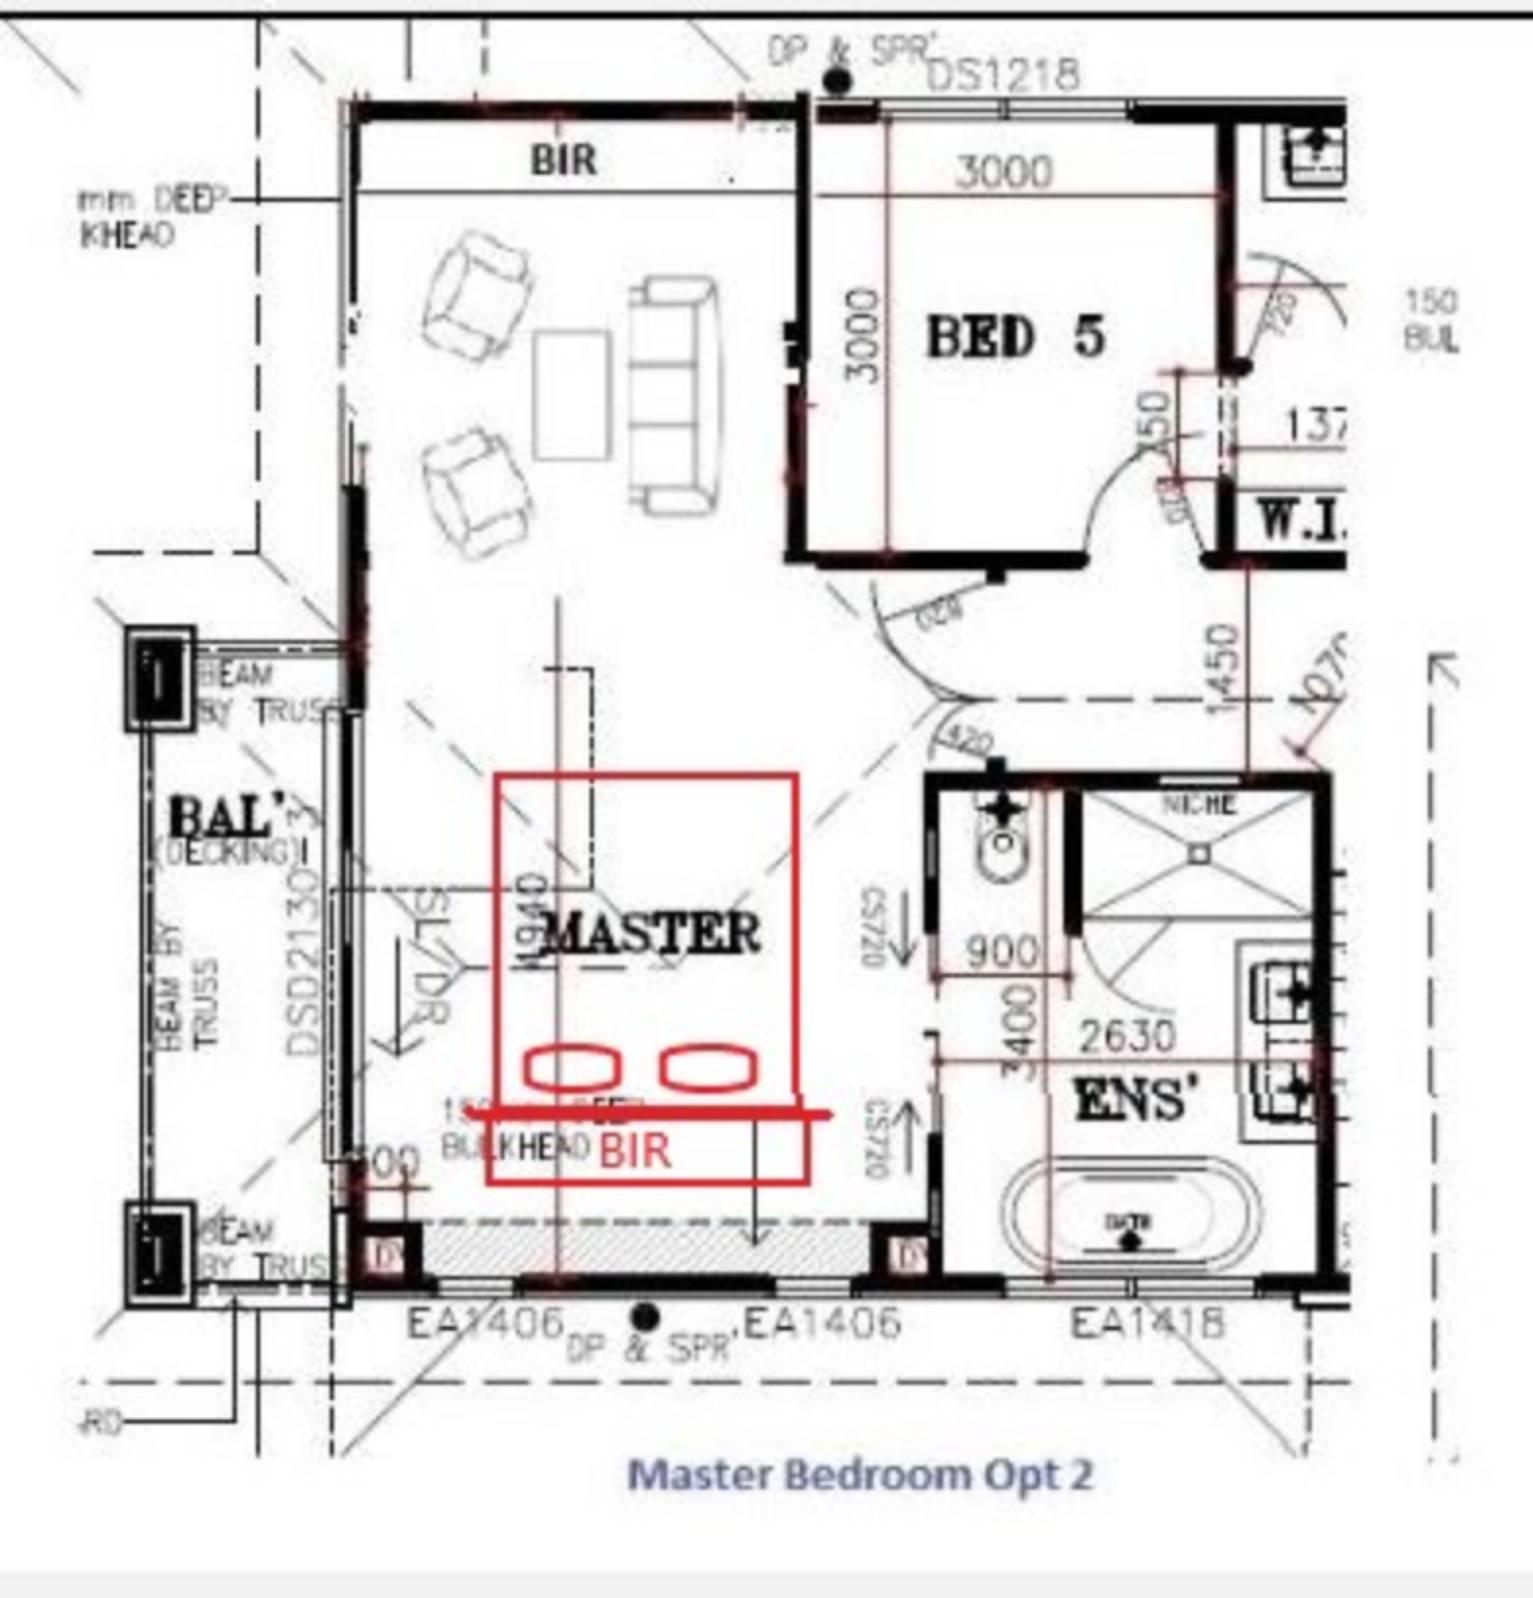 View: Master bedroom layout